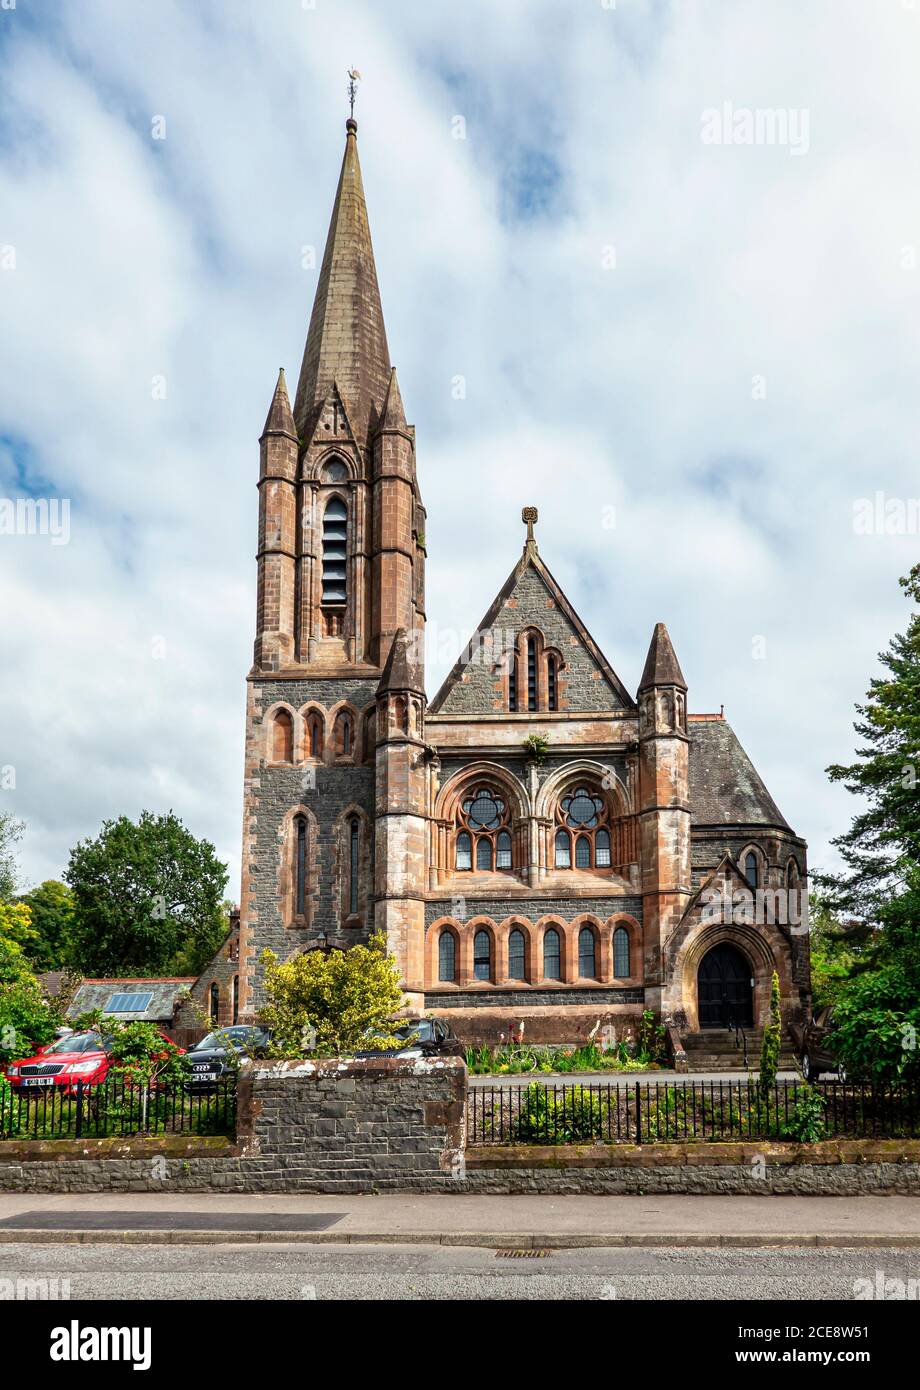 St. Mary's Church Apartments in Academy Road Moffat Dumfries & Galloway Scotland UK Foto Stock